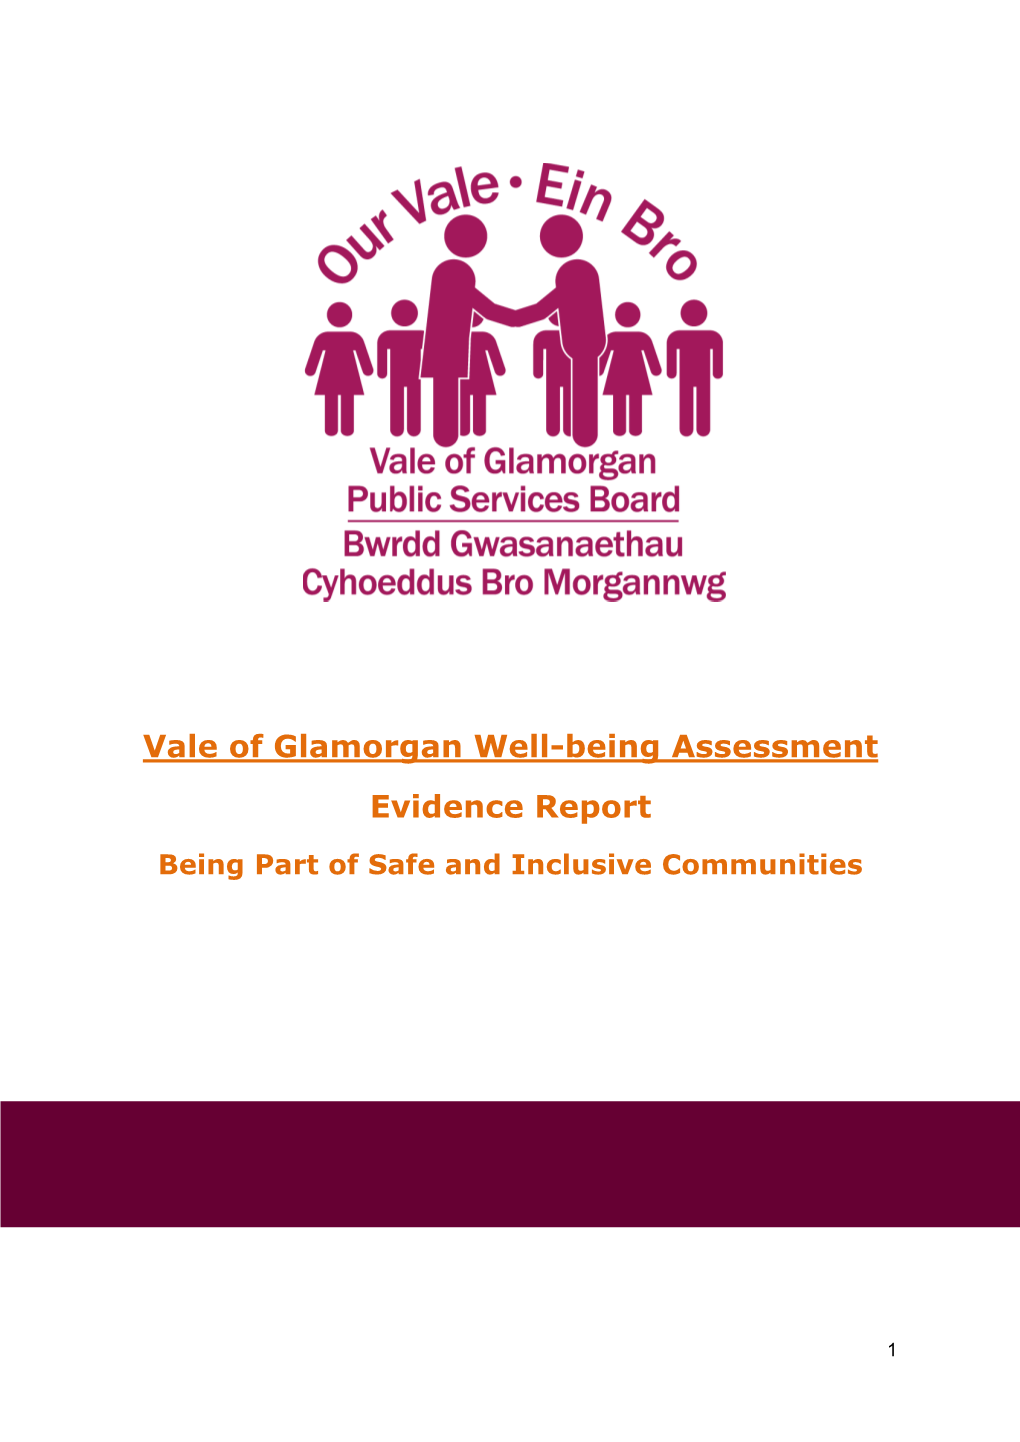 Being Part of Safe and Inclusive Communities Evidence Report